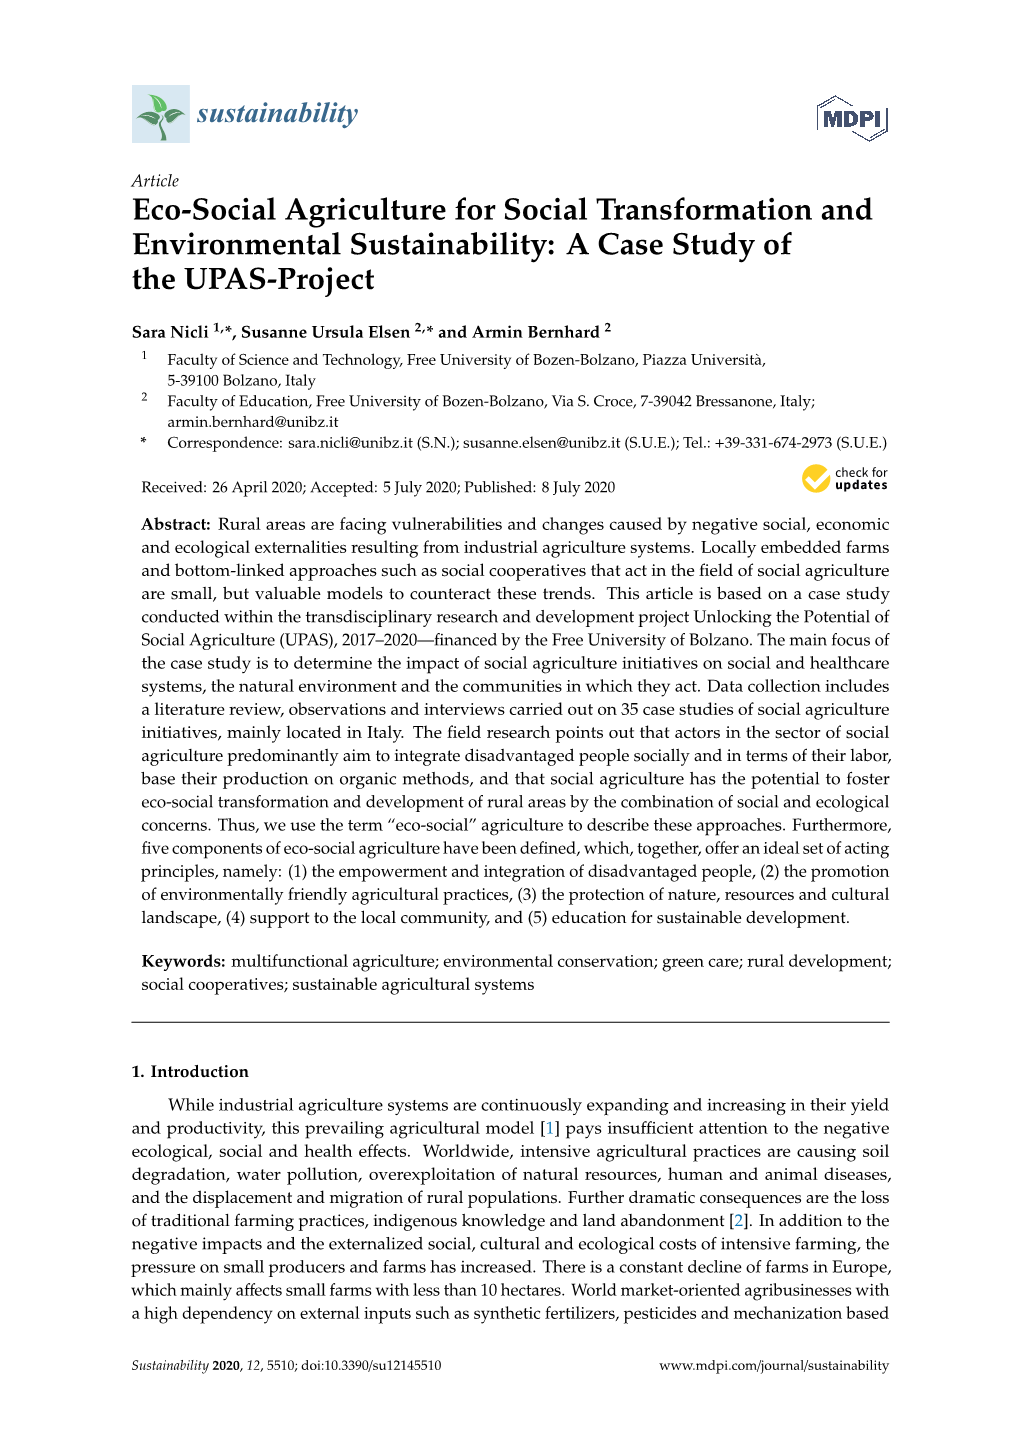 Eco-Social Agriculture for Social Transformation and Environmental Sustainability: a Case Study of the UPAS-Project